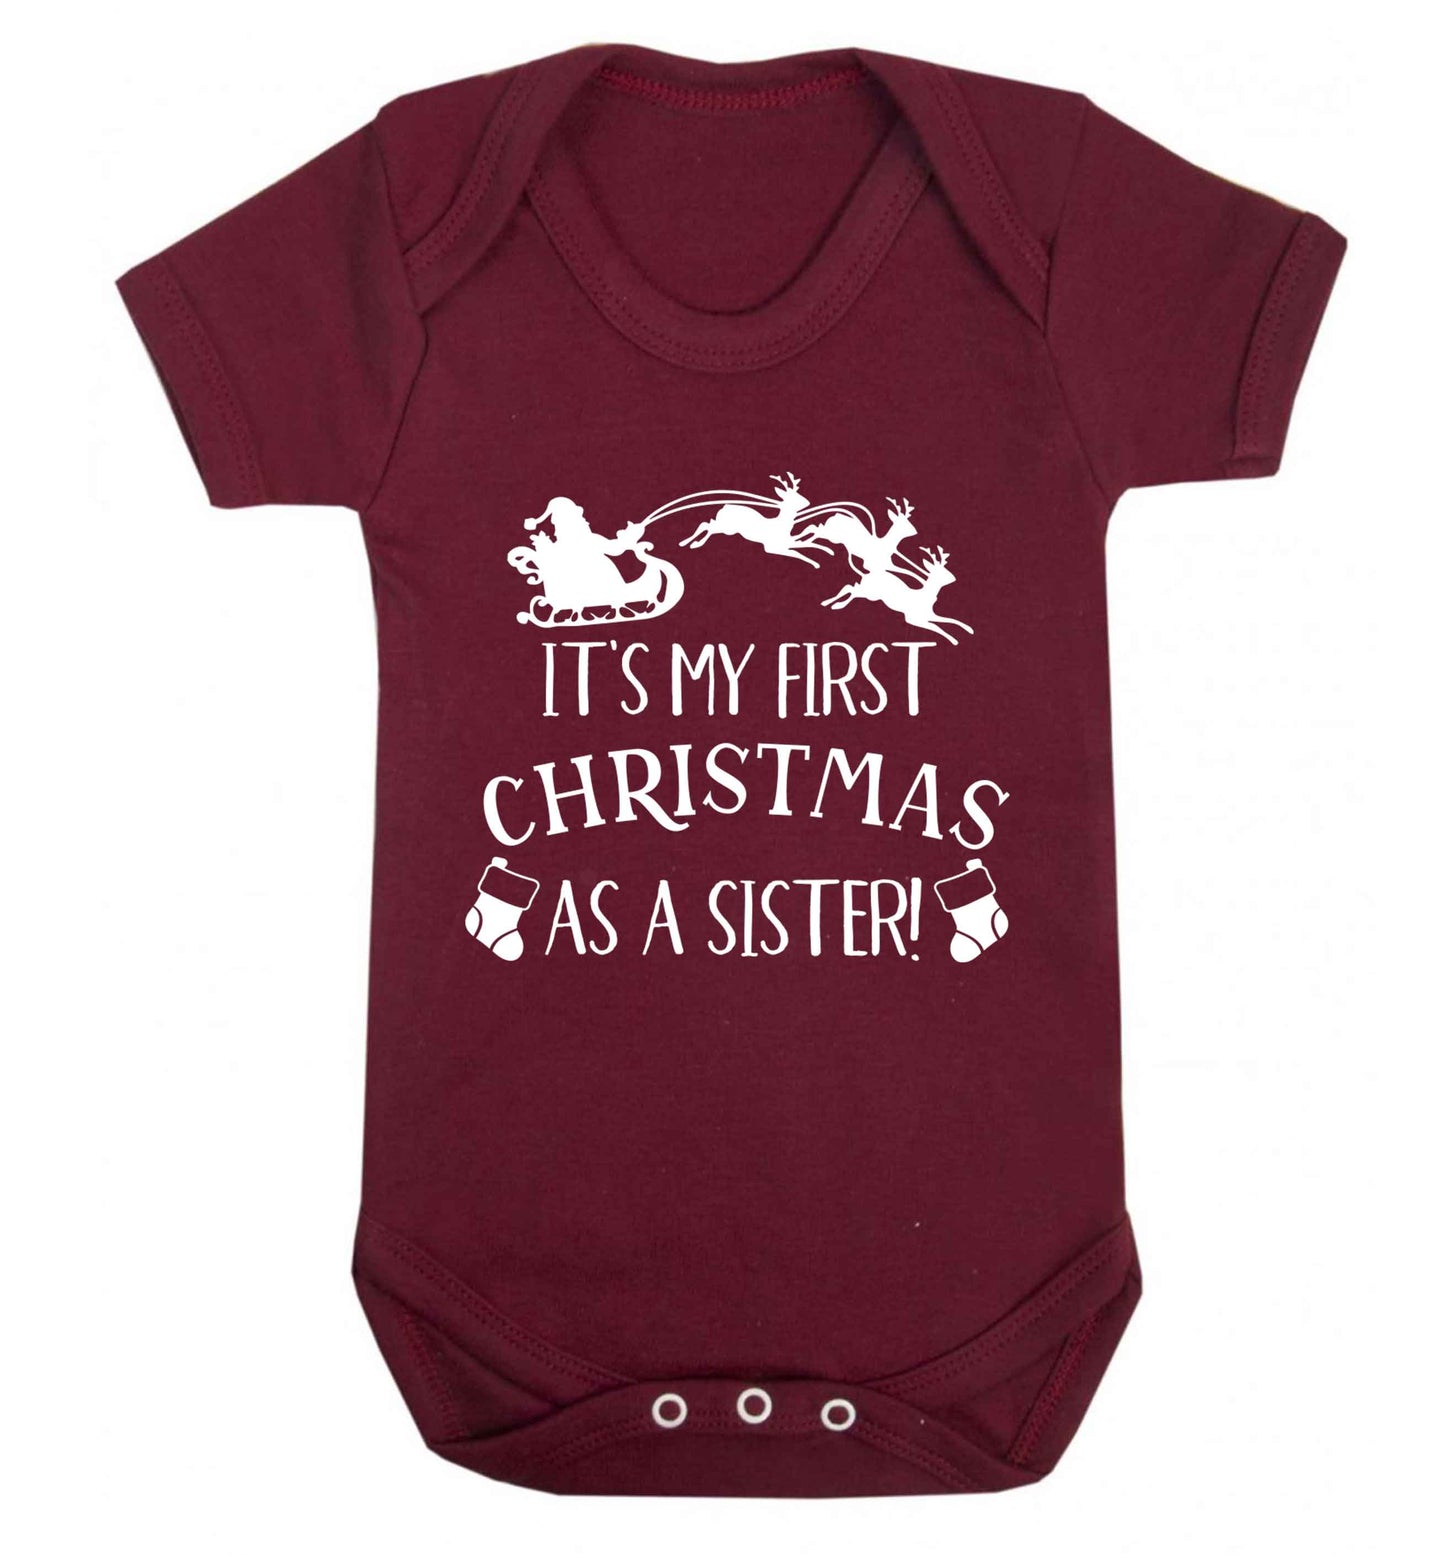 It's my first Christmas as a sister! Baby Vest maroon 18-24 months